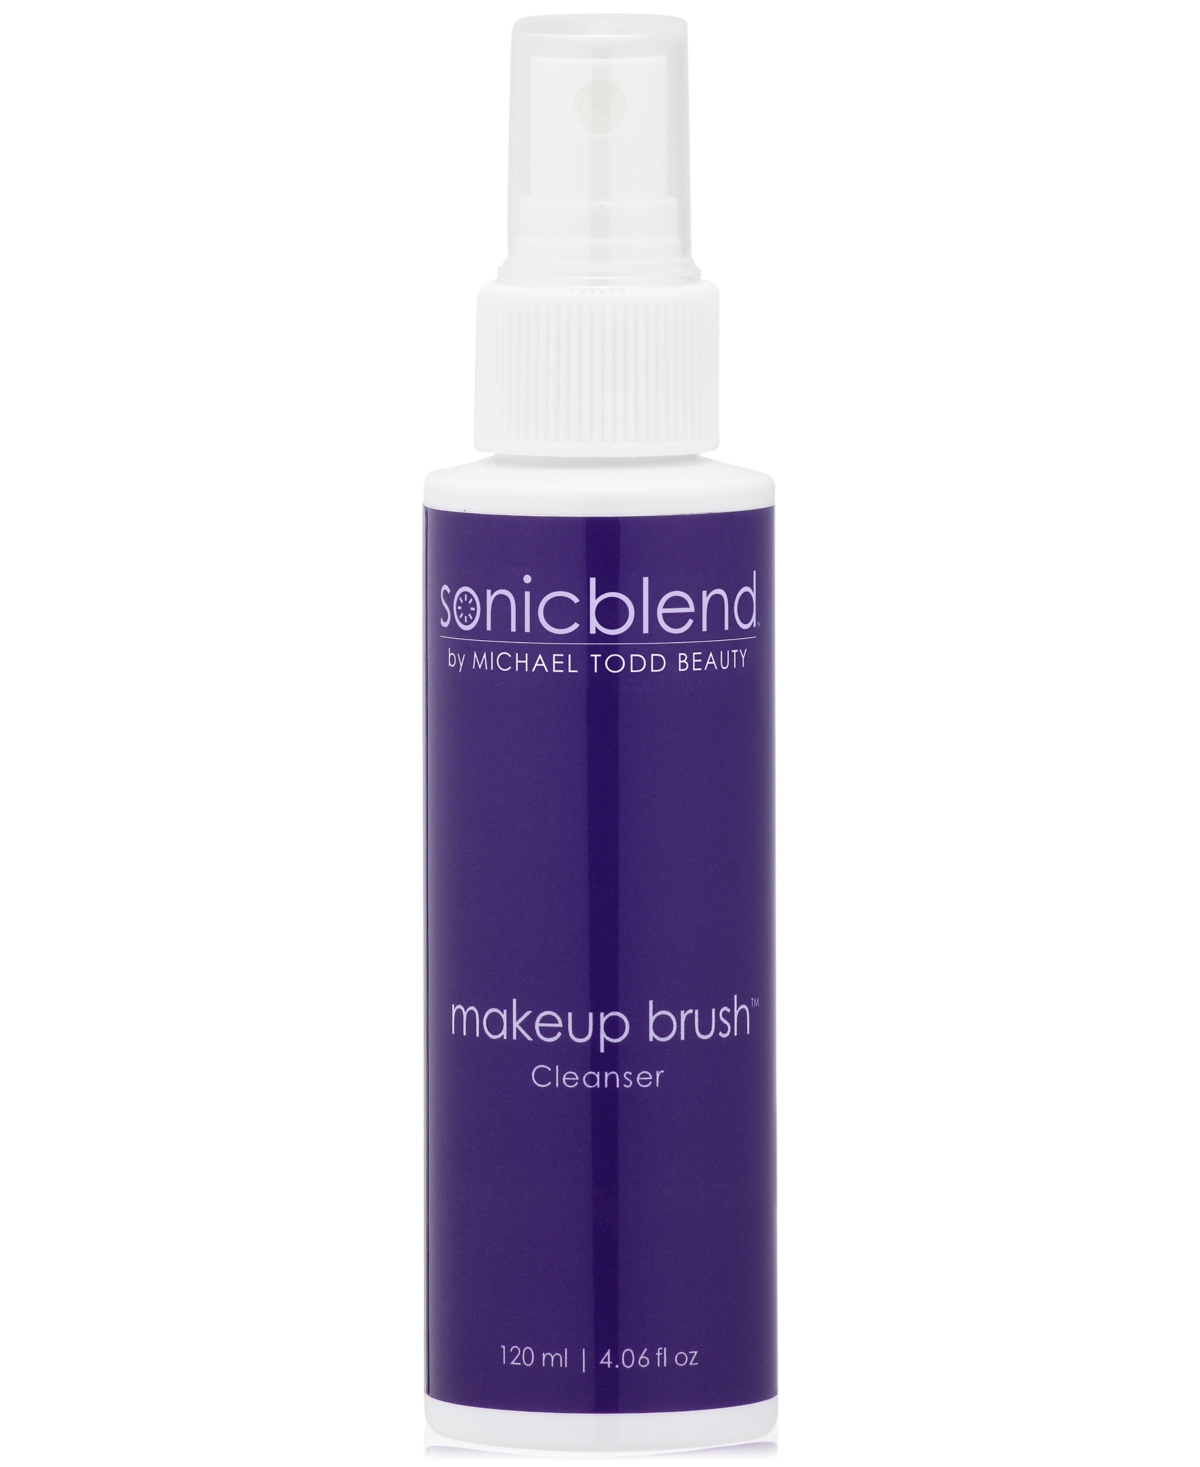 Sonicblend Makeup Brush Cleanser, 3.4 oz. - Cleanser